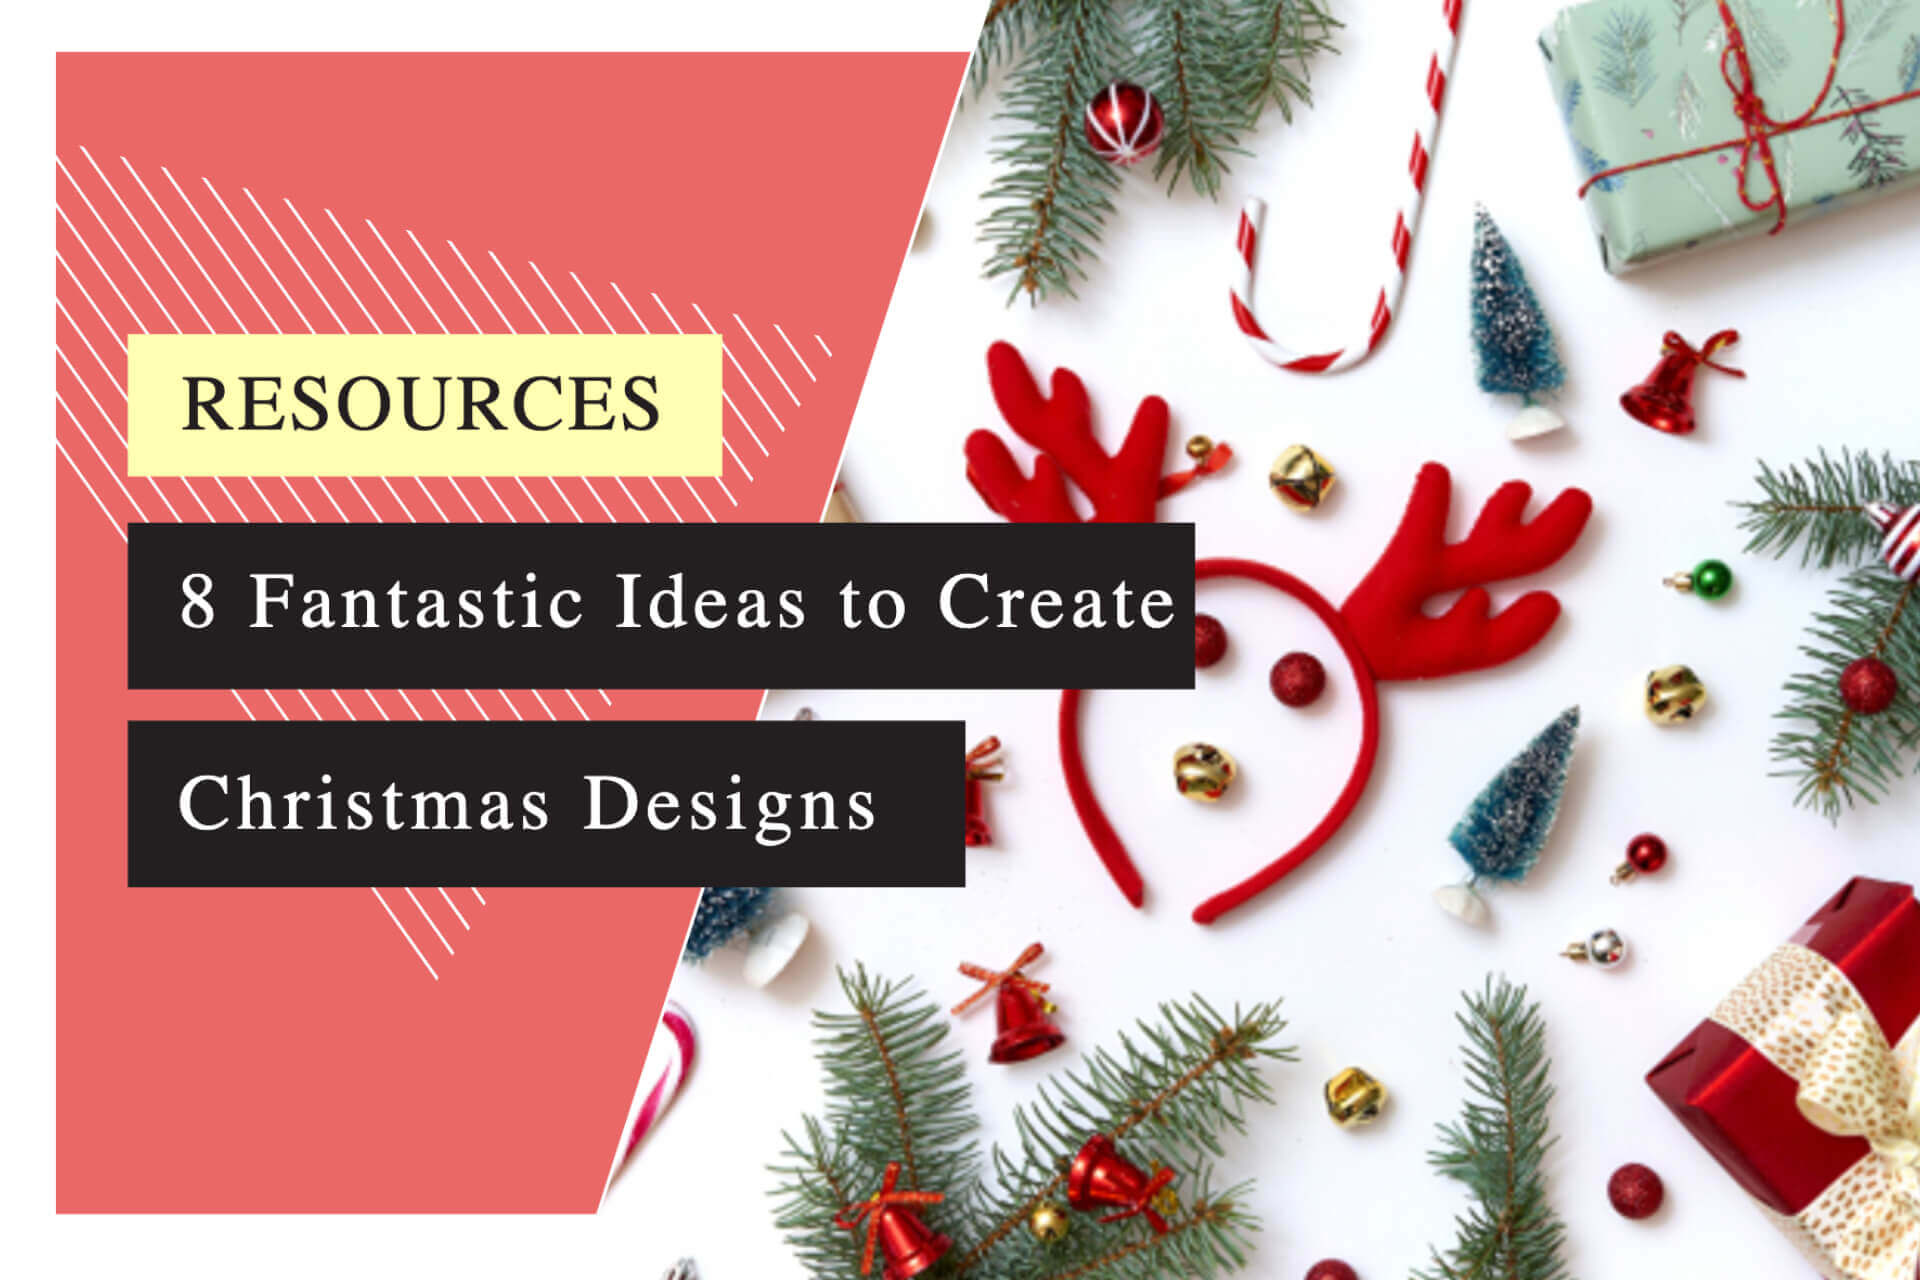 8 Fantastic Ideas to Create Christmas Designs with Free Christmas Character Clipart